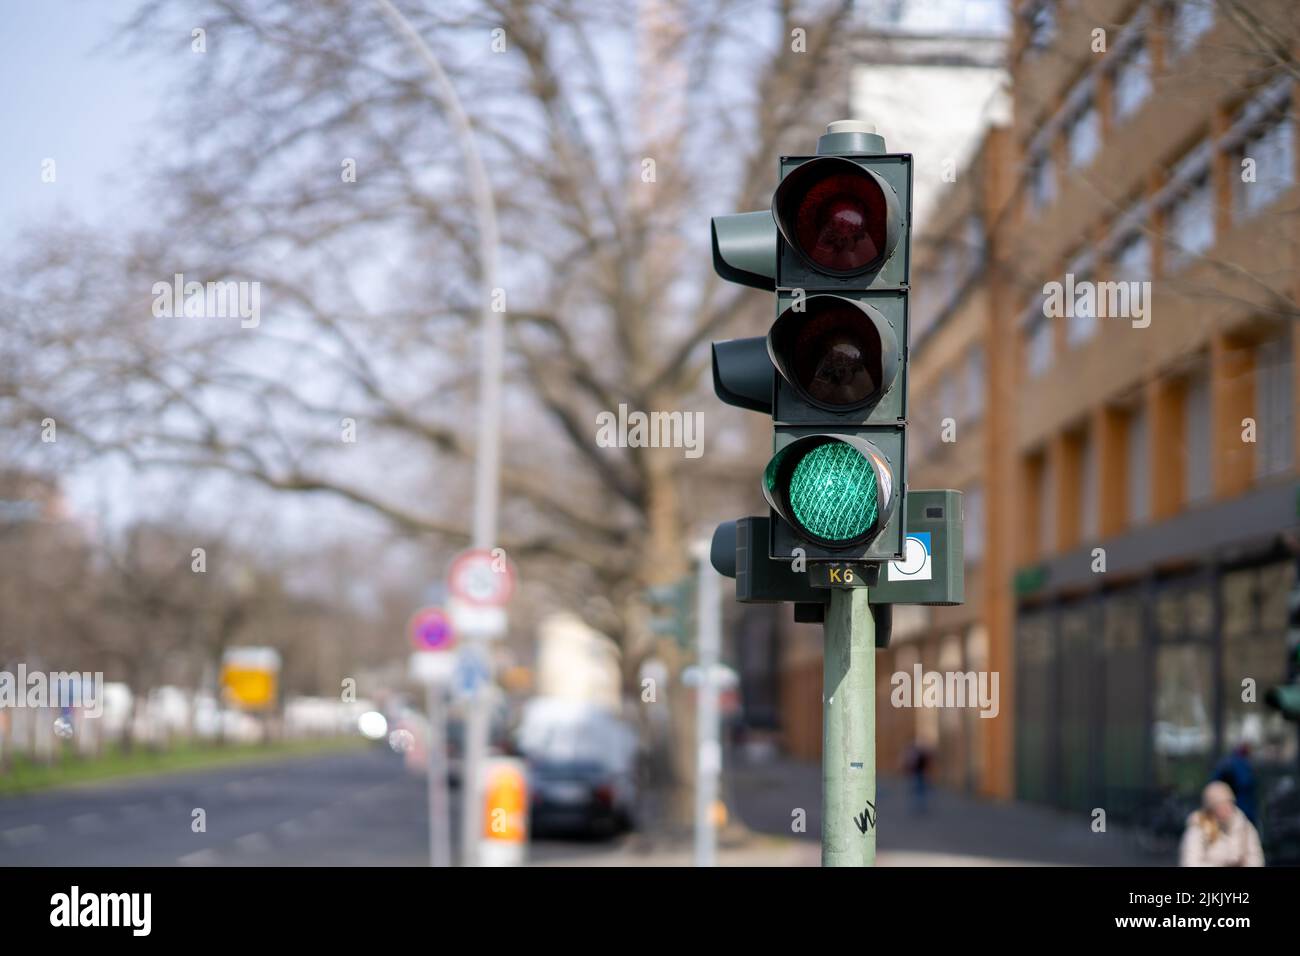 A photo of traffic lights in a city with the green lamp on Stock Photo